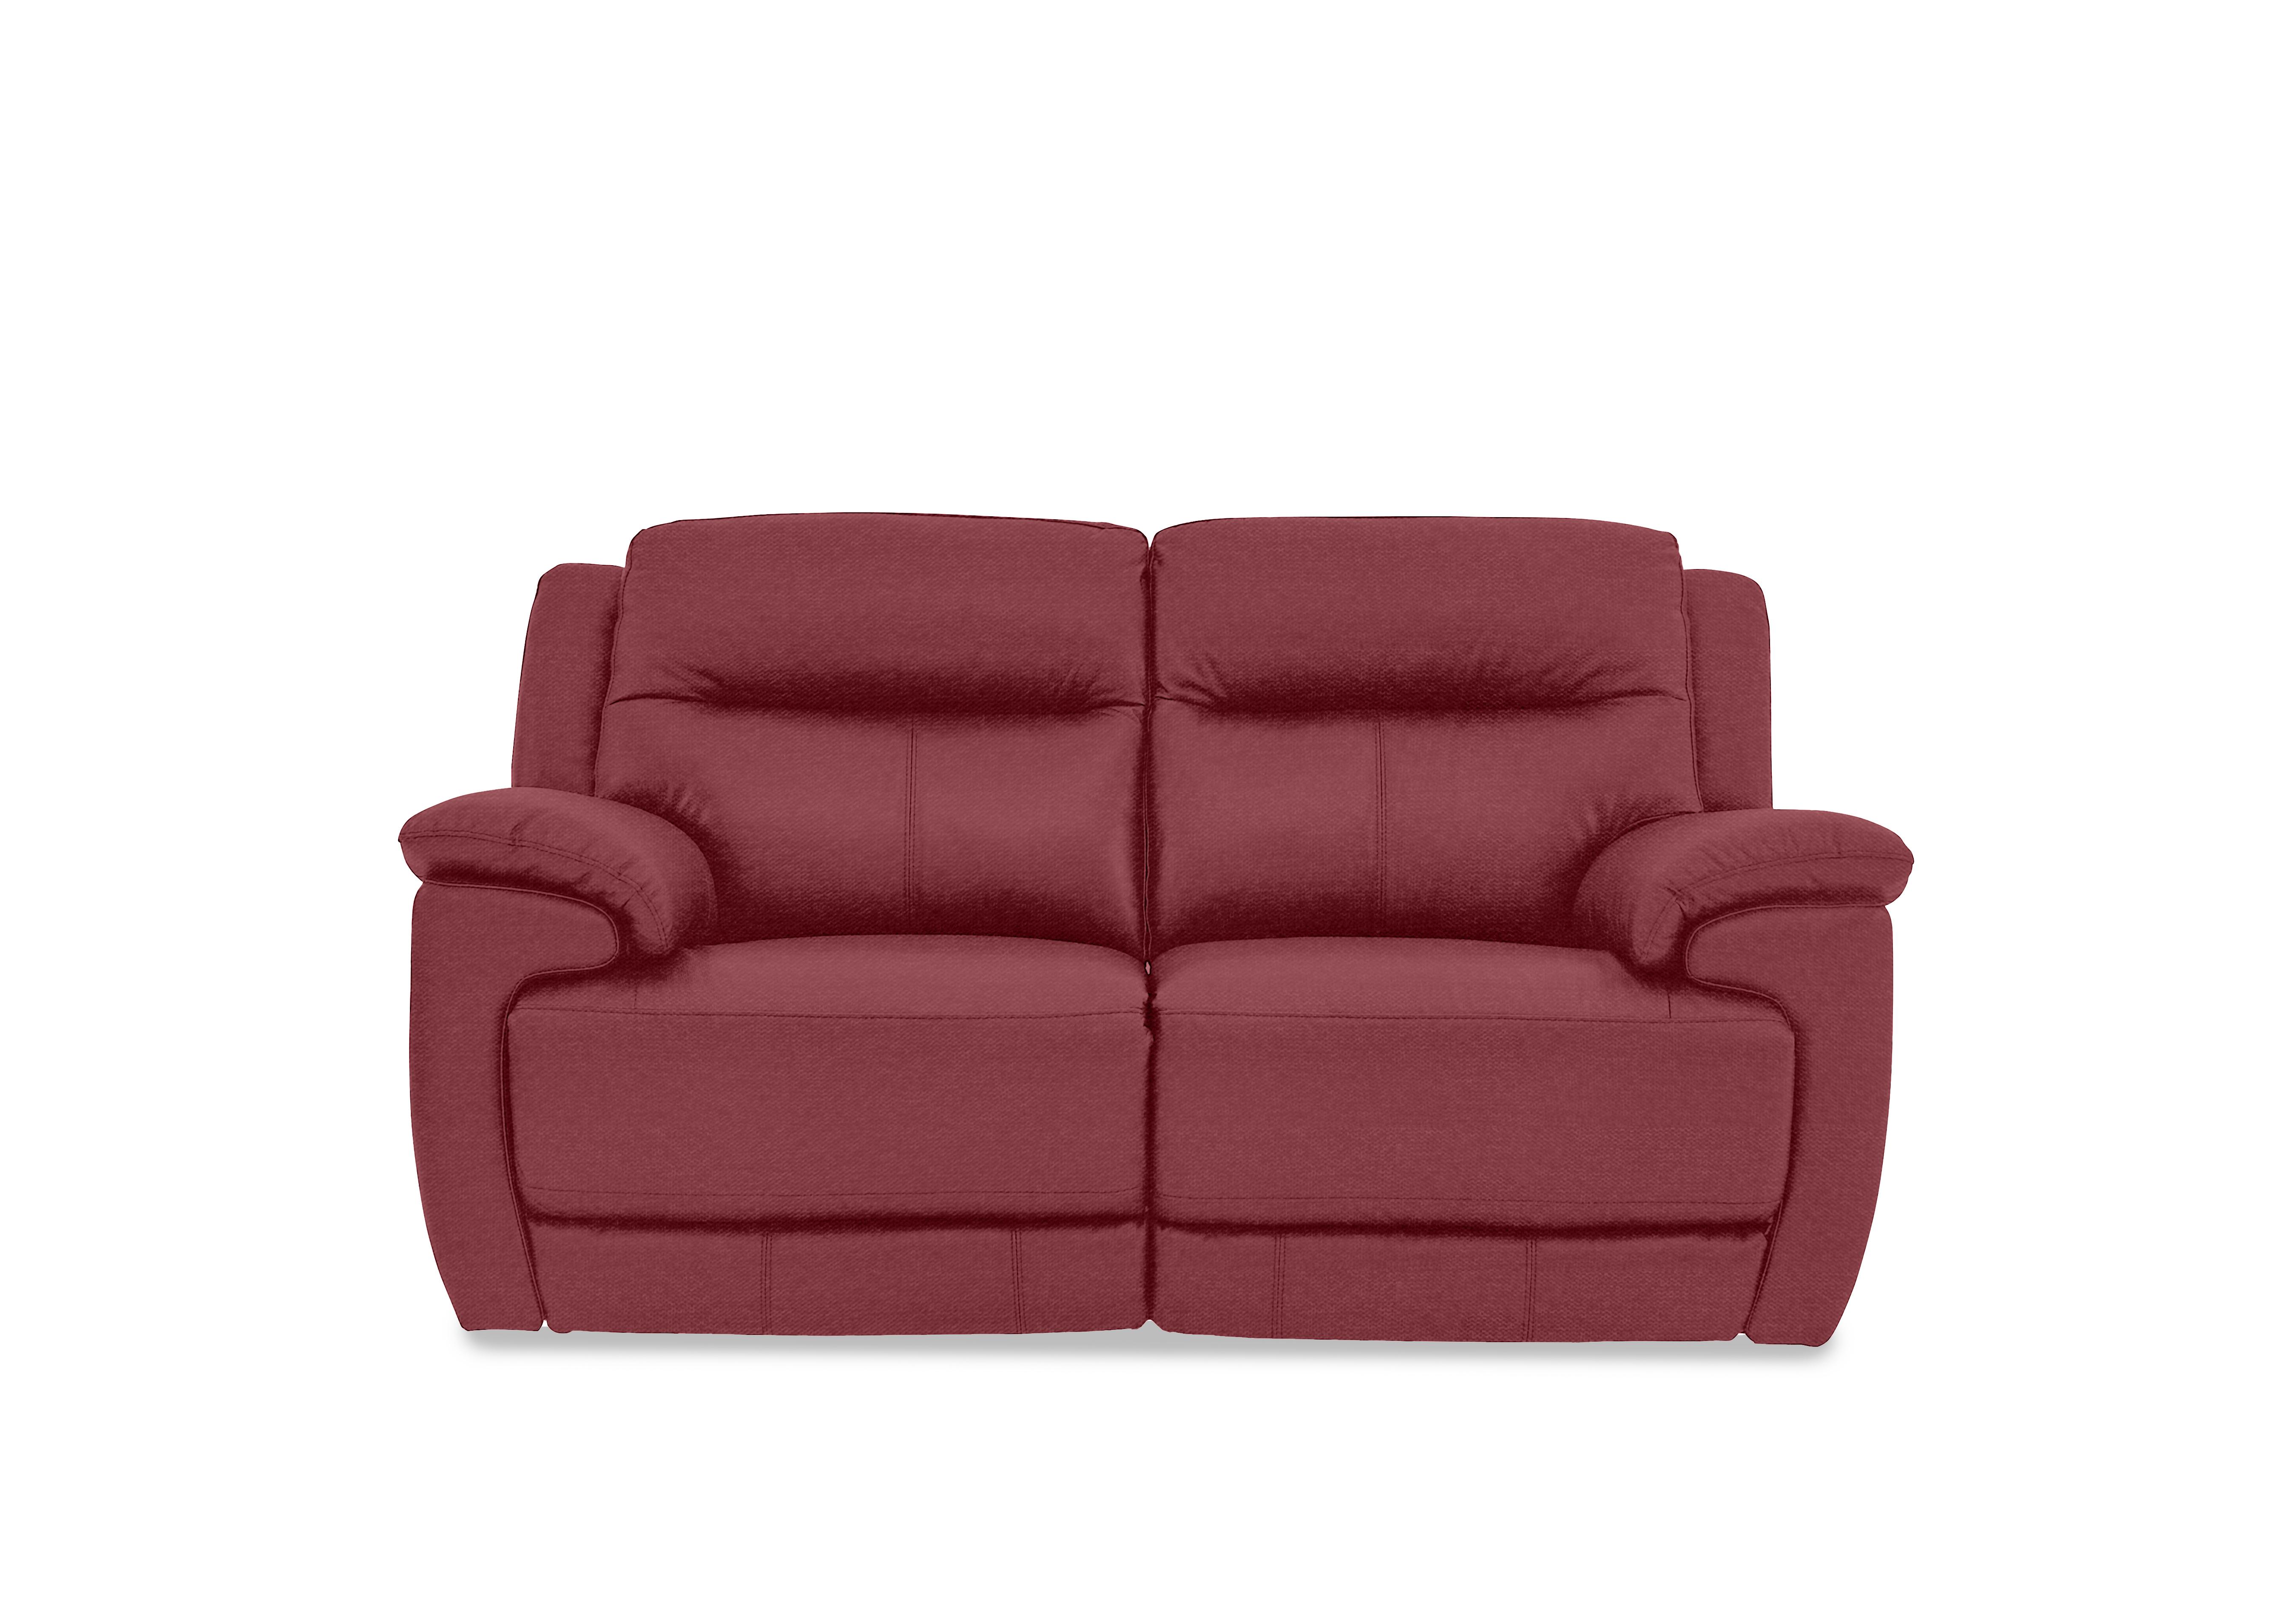 Touch 2 Seater Heavy Duty Fabric Sofa in Fab-Blt-R29 Red on Furniture Village